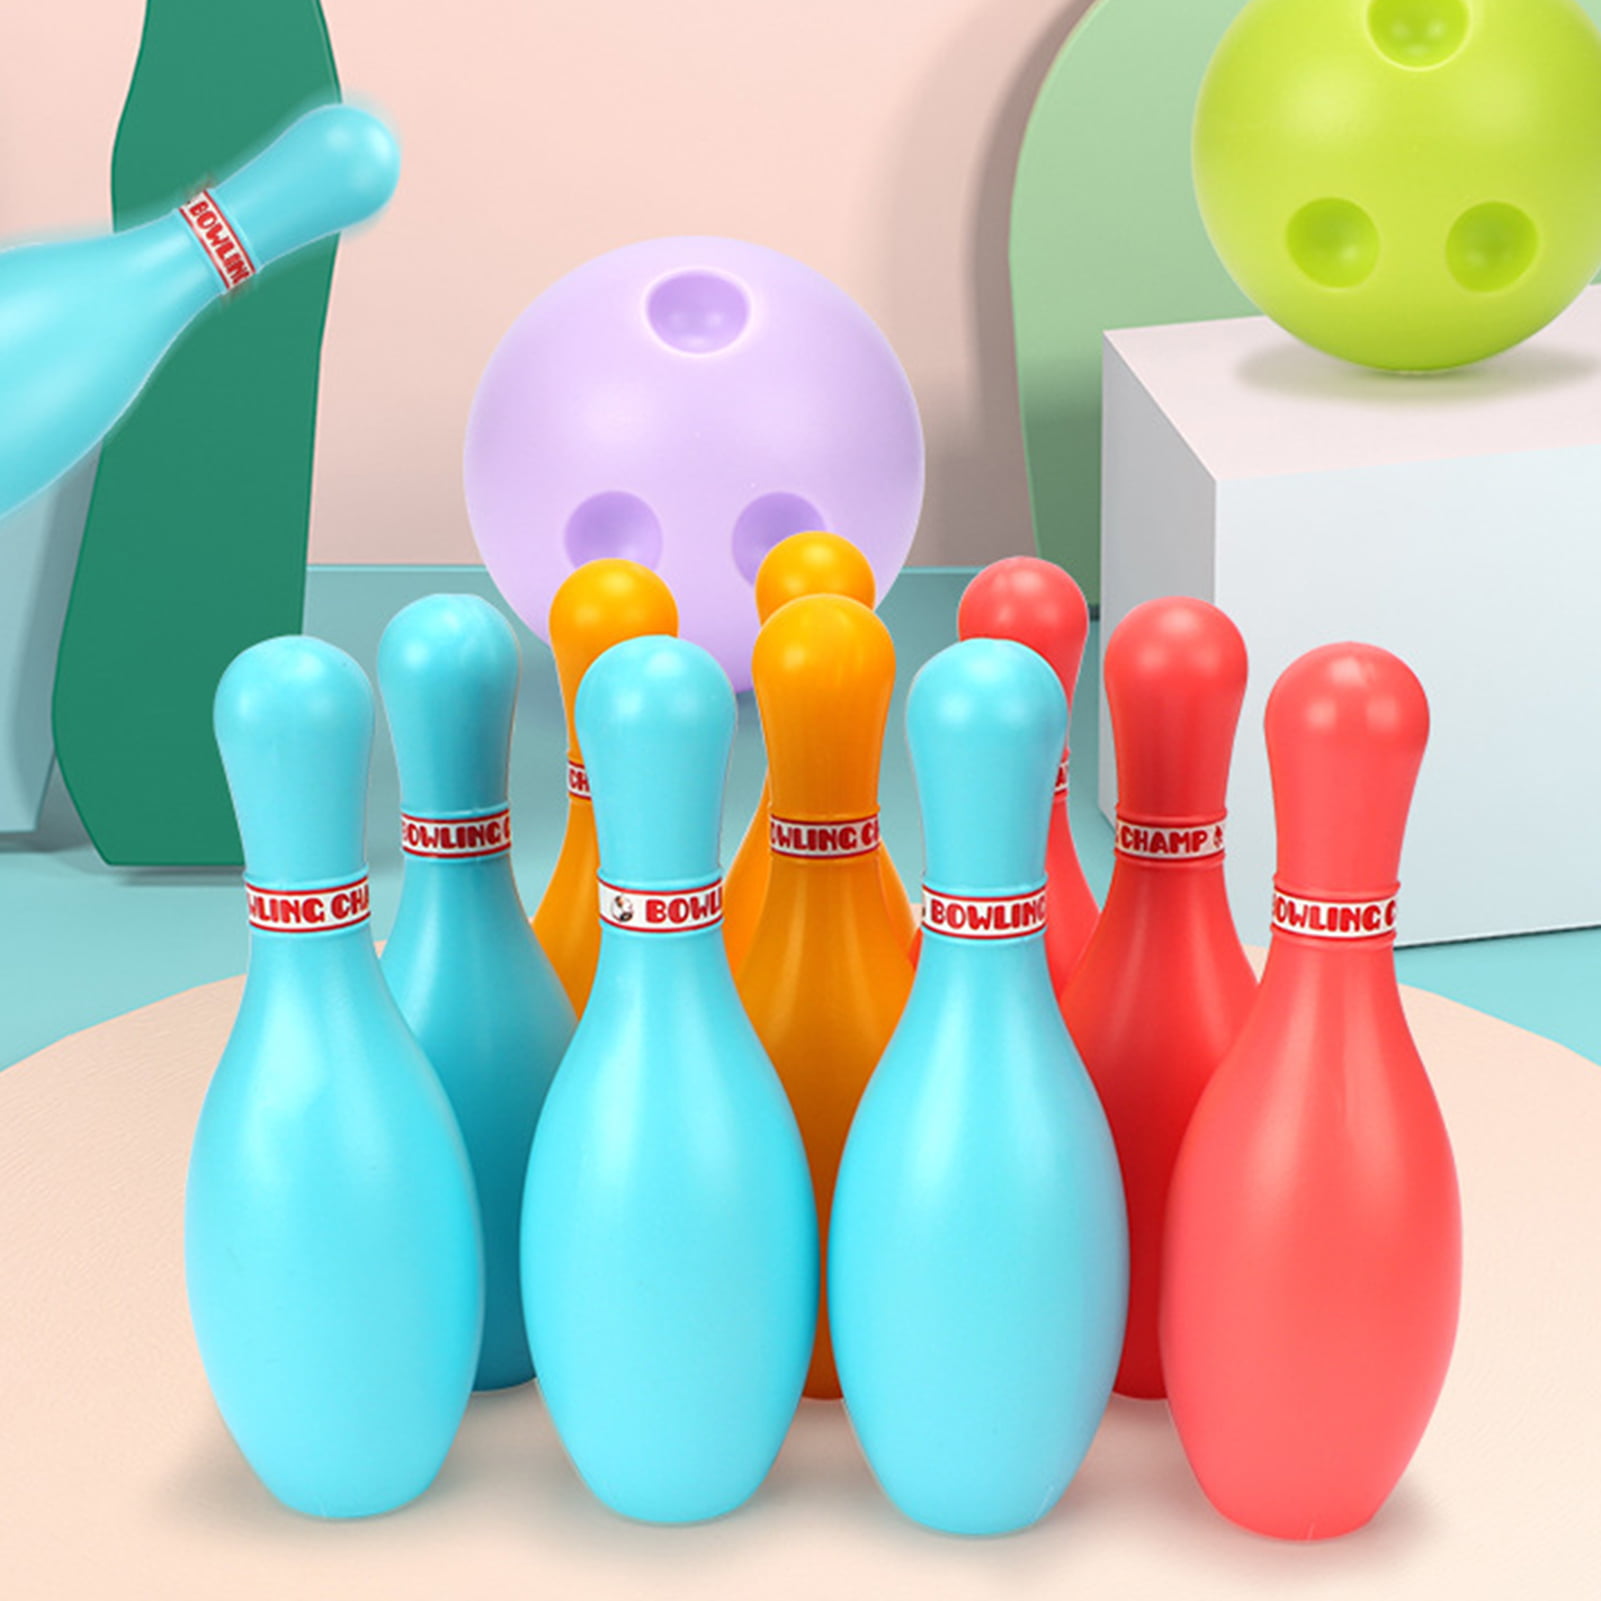 Kids Bowling Set 10 Pins 2 Balls Plastic Ball Indoor Sport Games Party Bowls Family Game Educational Toys for Boys Girls Toddlers Children Age 3 4 5 6 Years Old 